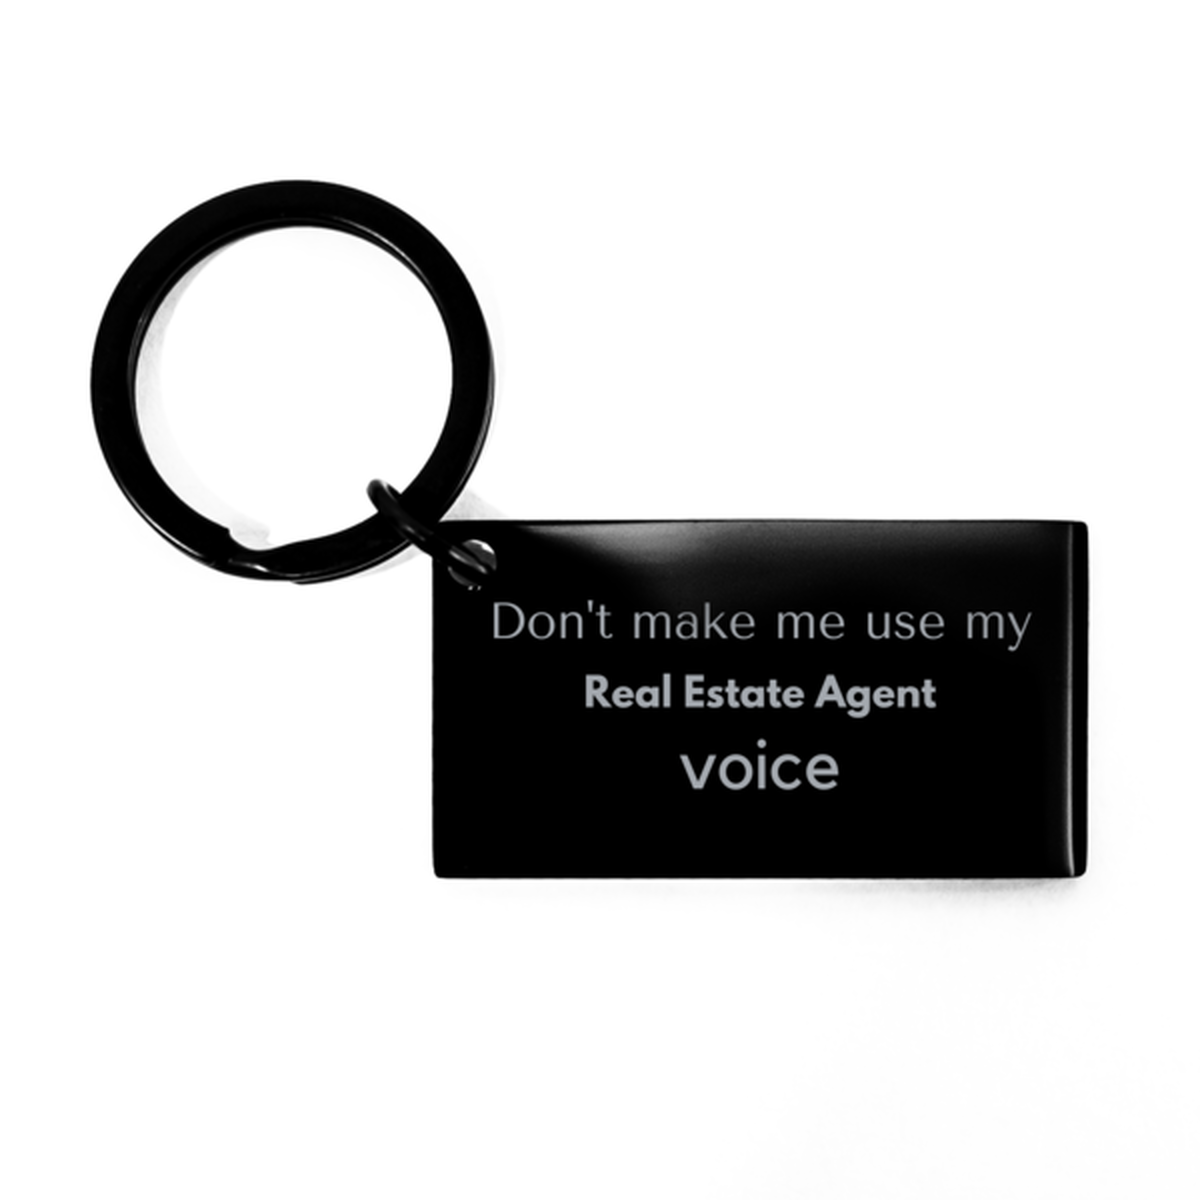 Don't make me use my Real Estate Agent voice, Sarcasm Real Estate Agent Gifts, Christmas Real Estate Agent Keychain Birthday Unique Gifts For Real Estate Agent Coworkers, Men, Women, Colleague, Friends